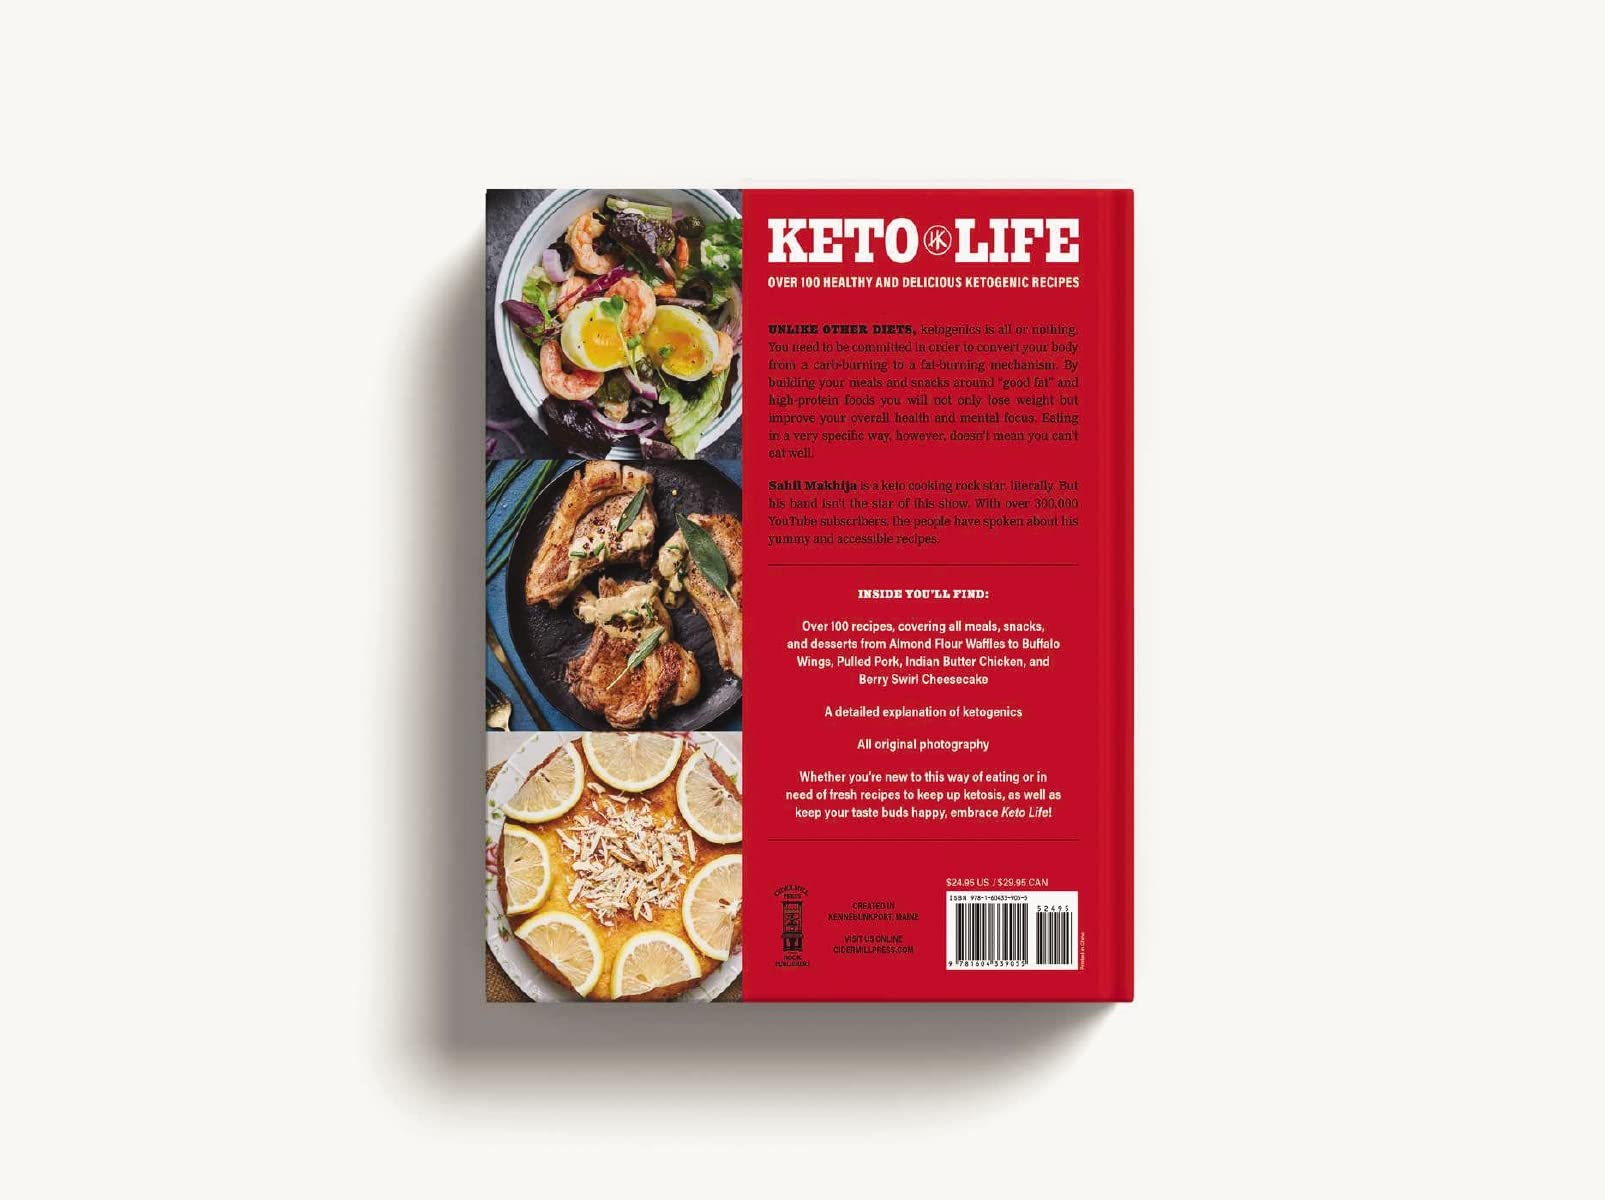 Keto Life: Over 100 Healthy and Delicious Ketogenic Recipes (Healthy Cookbooks, Ketogenic Cooking, Fitness Recipes, Diet Nutrition Information, Gift ... and Healthy Food, Simple and Easy Recipes)